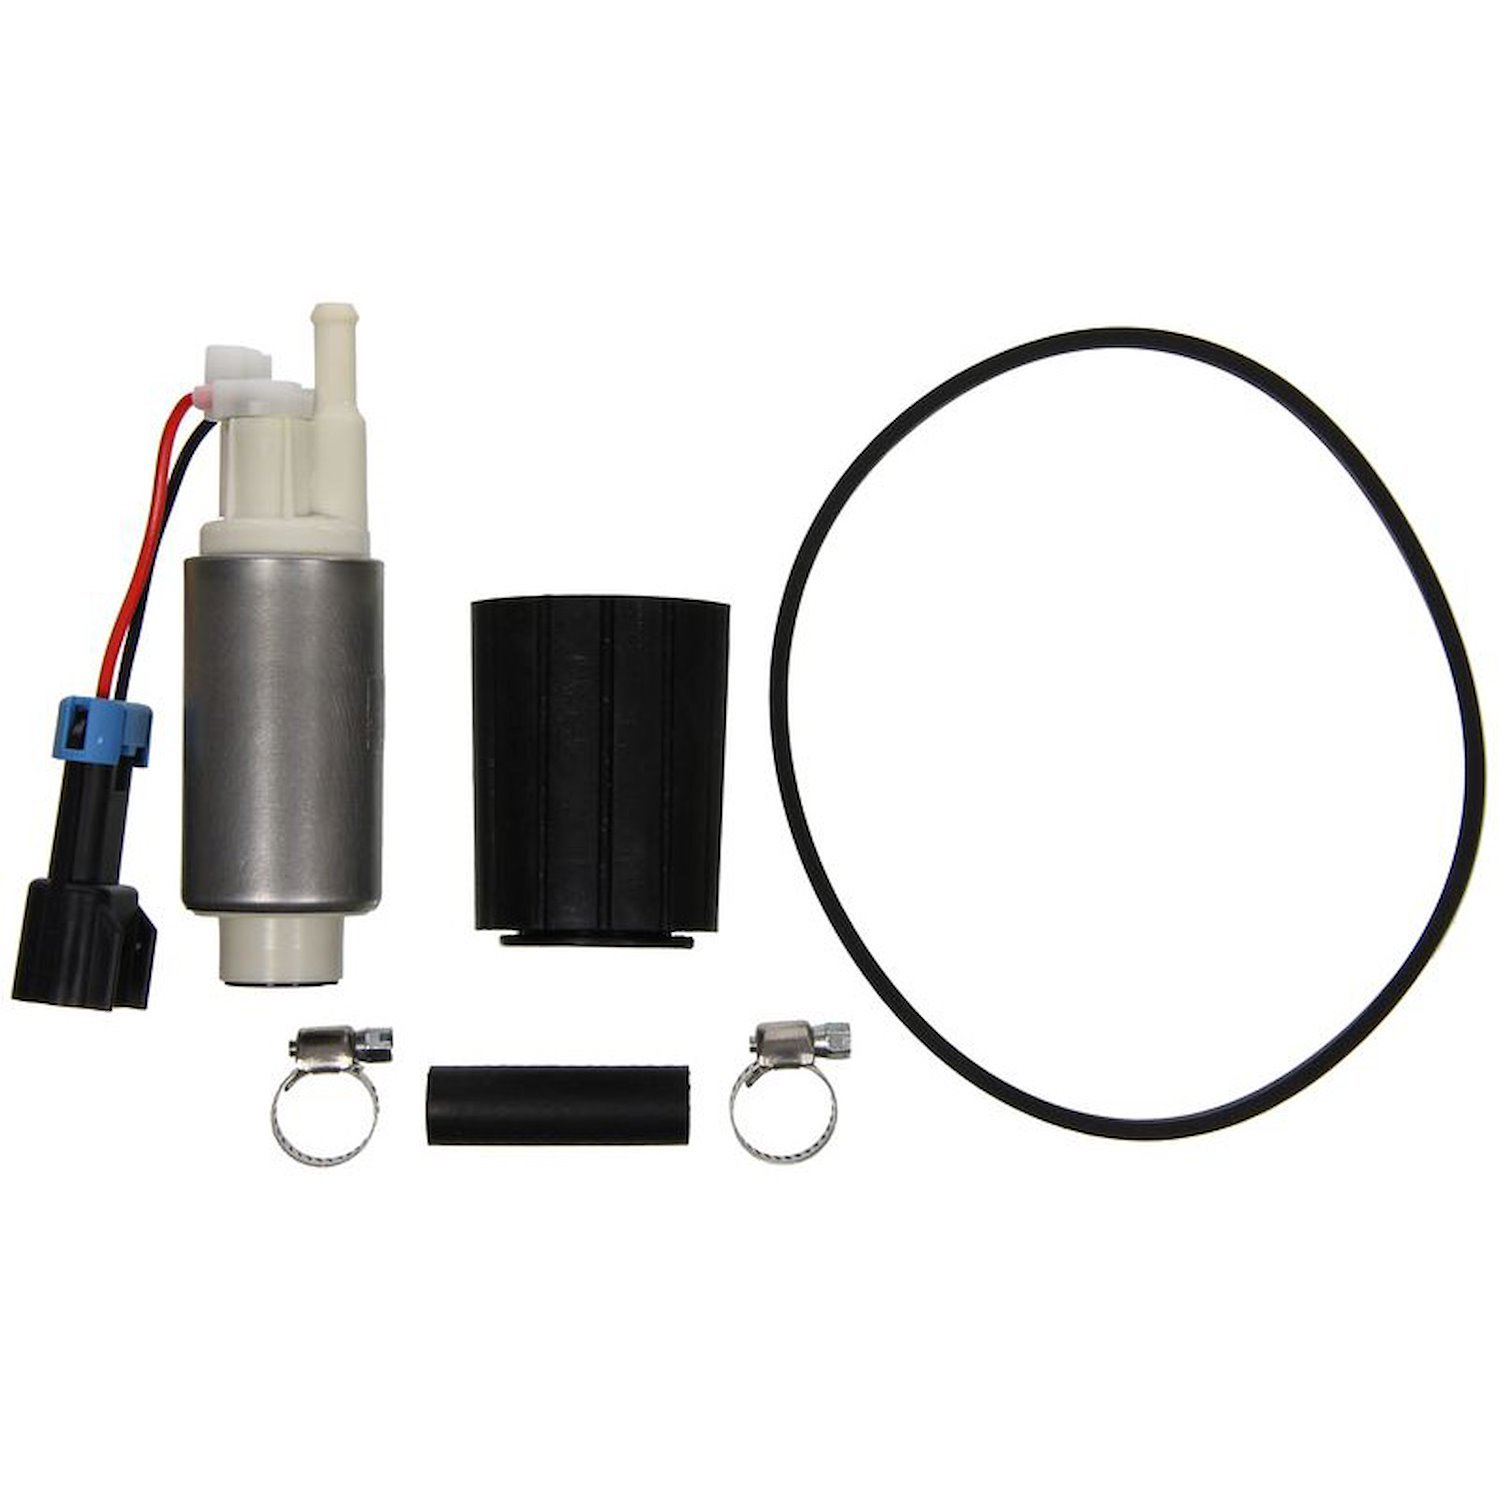 EFI In-Tank Electric Fuel Pump for 1999-2004 Ford